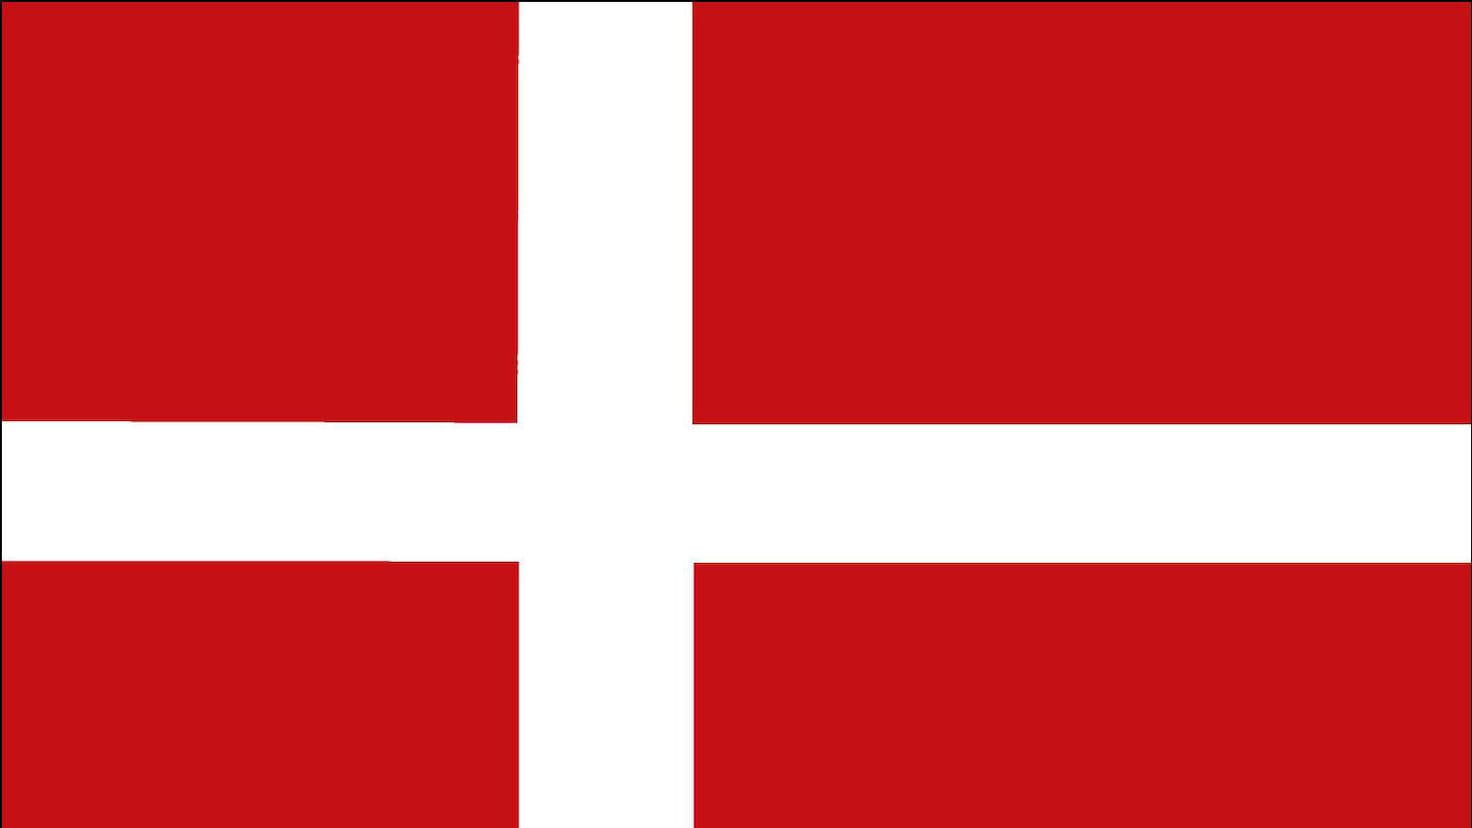 Flag of Denmark: why is it red and what does the white cross mean?
